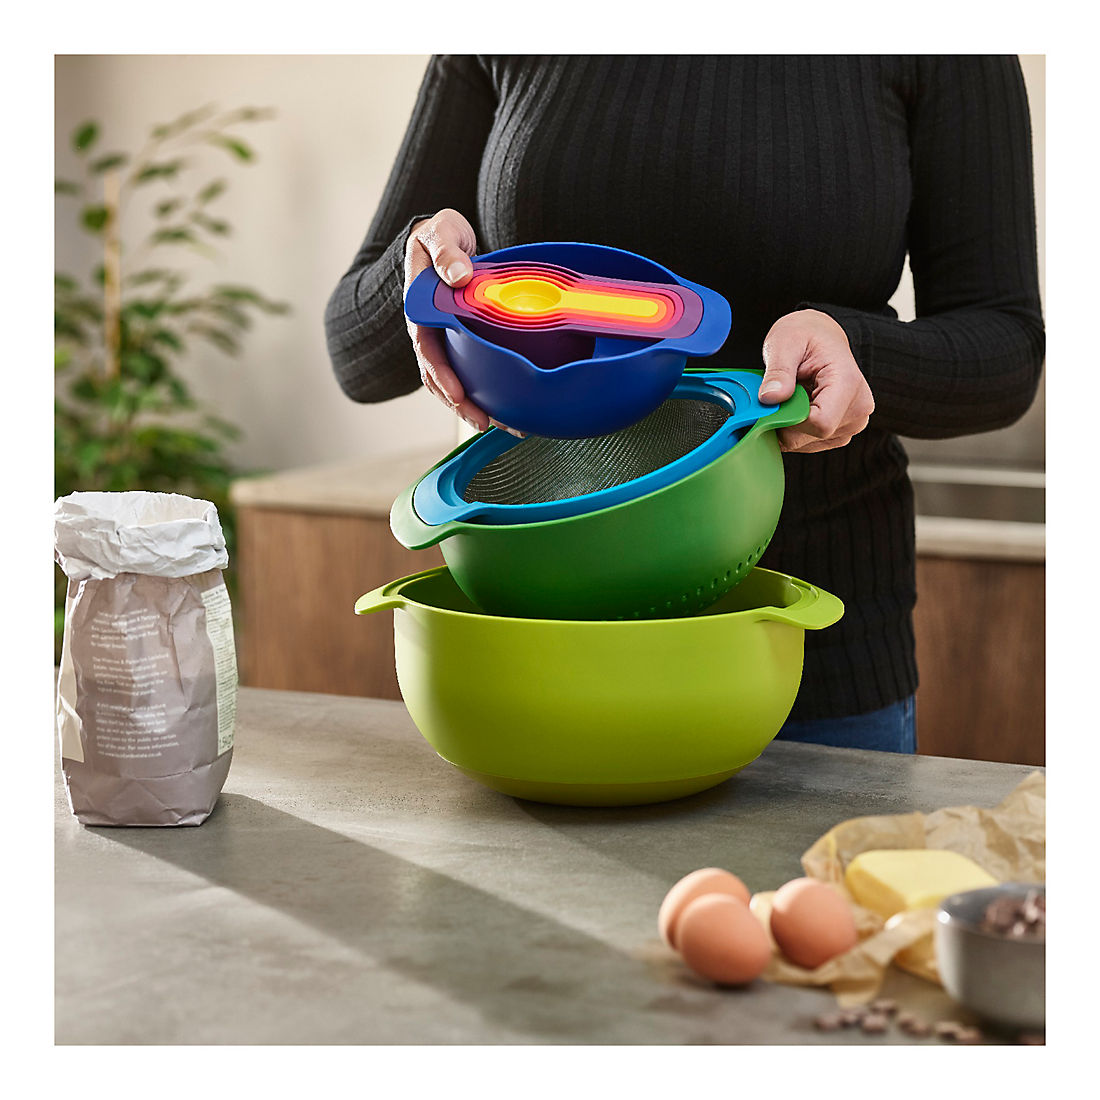 Mixing Bowls with Lids Set,9 Piece Large Plastic Nesting Mixing